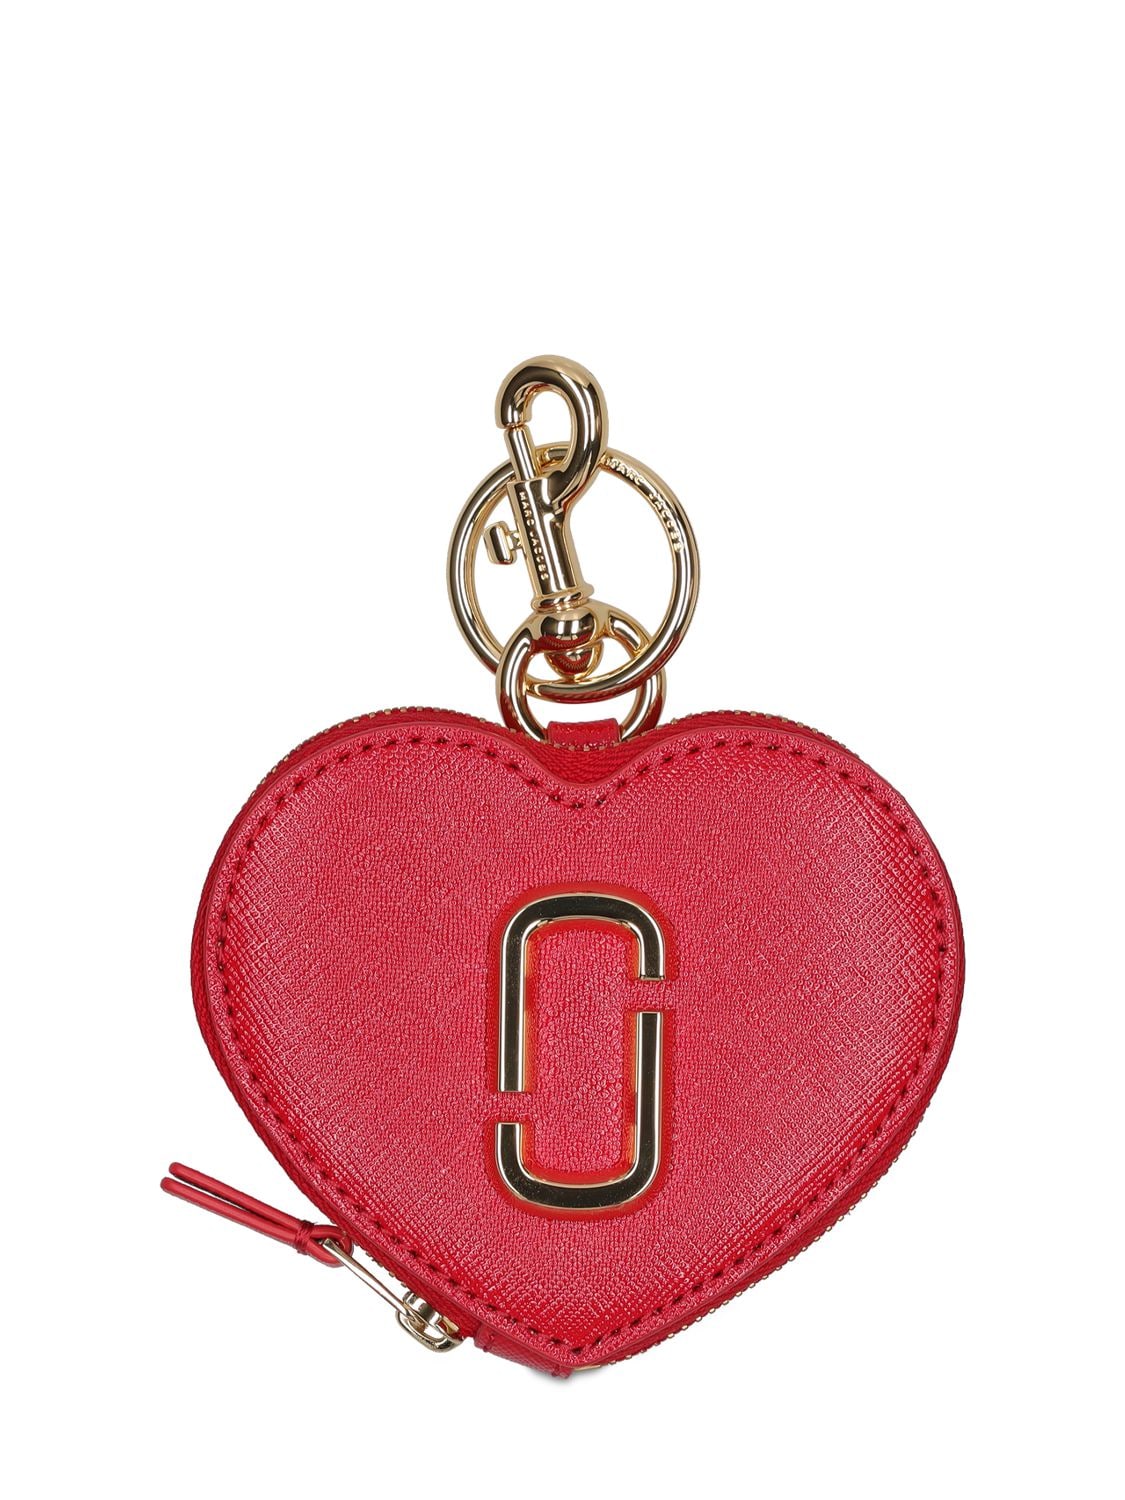 Marc Jacobs The Heart皮革手拿包 In True Red